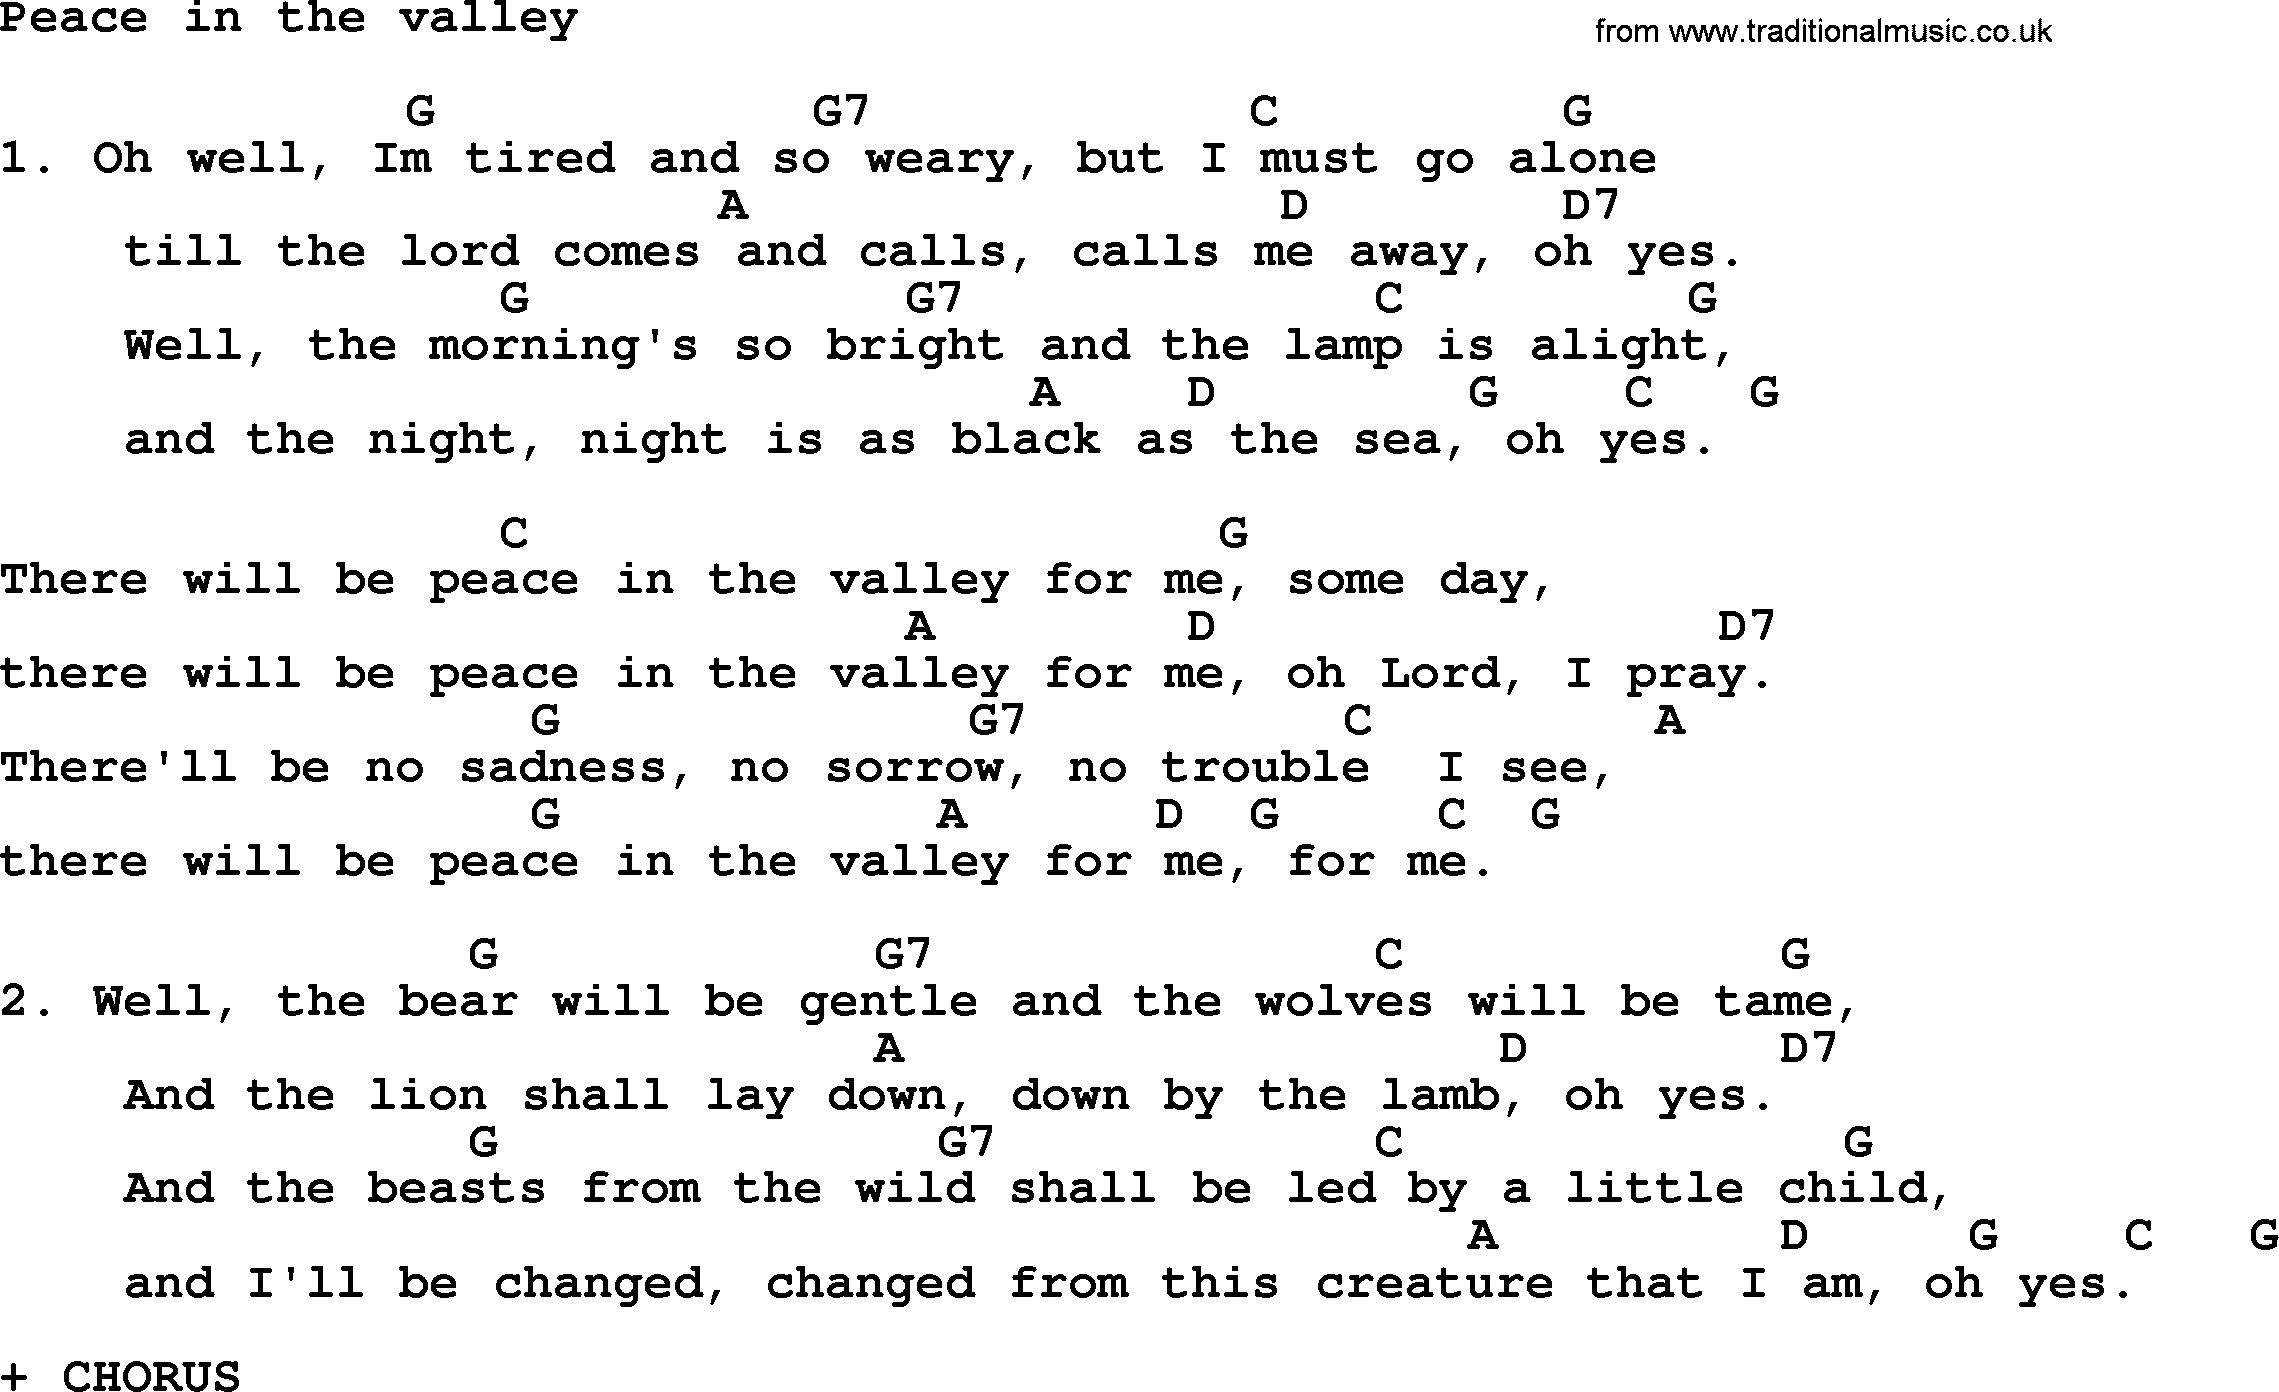 Loretta Lynn song: Peace In The Valley lyrics and chords